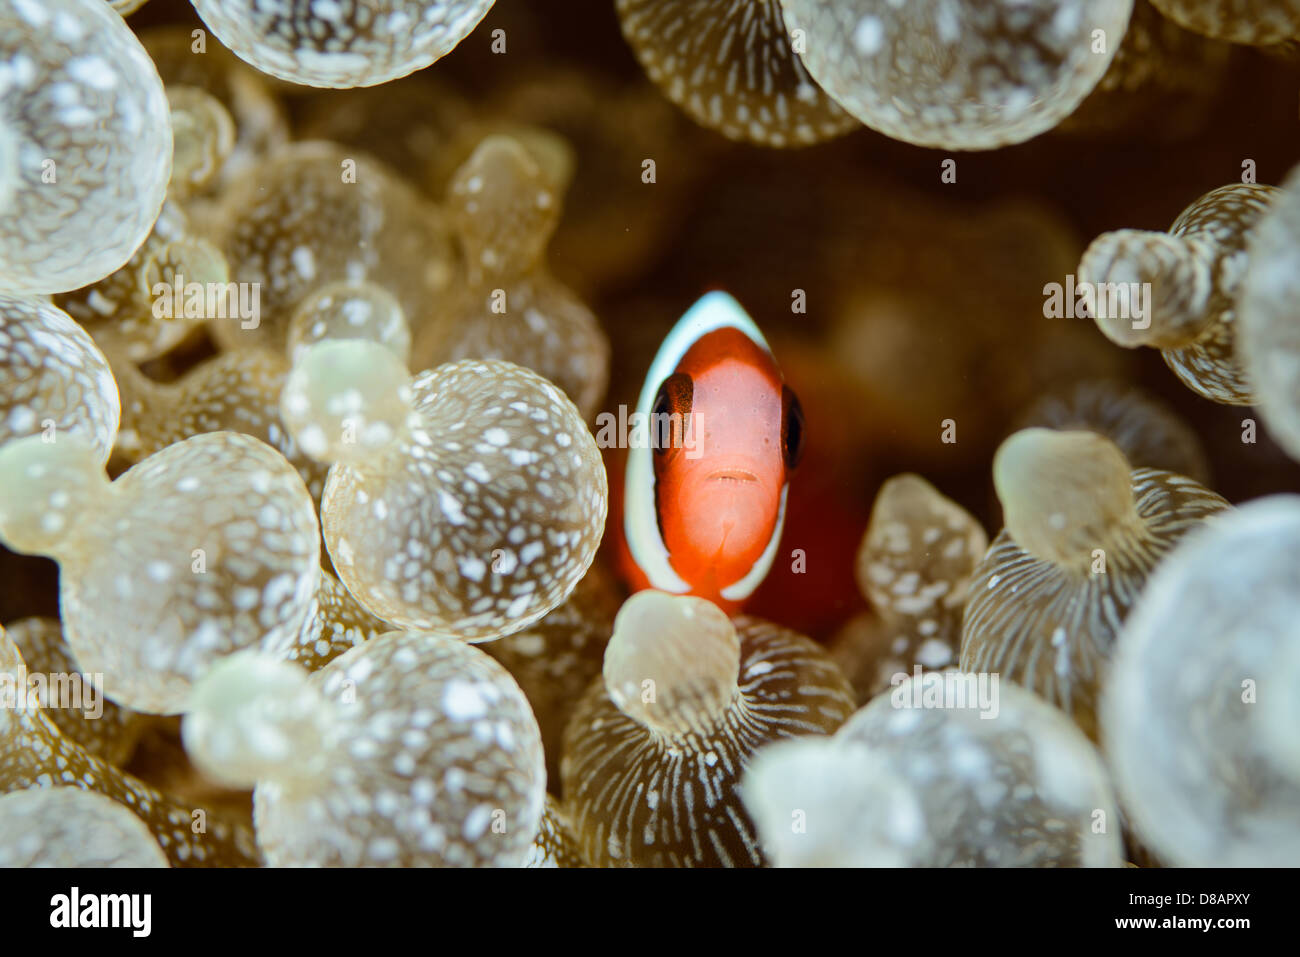 A Juvenile marron or spinecheek anemonefish hides in its interesting anemone with nipple shape tentacles. Ambon Indonesia Stock Photo